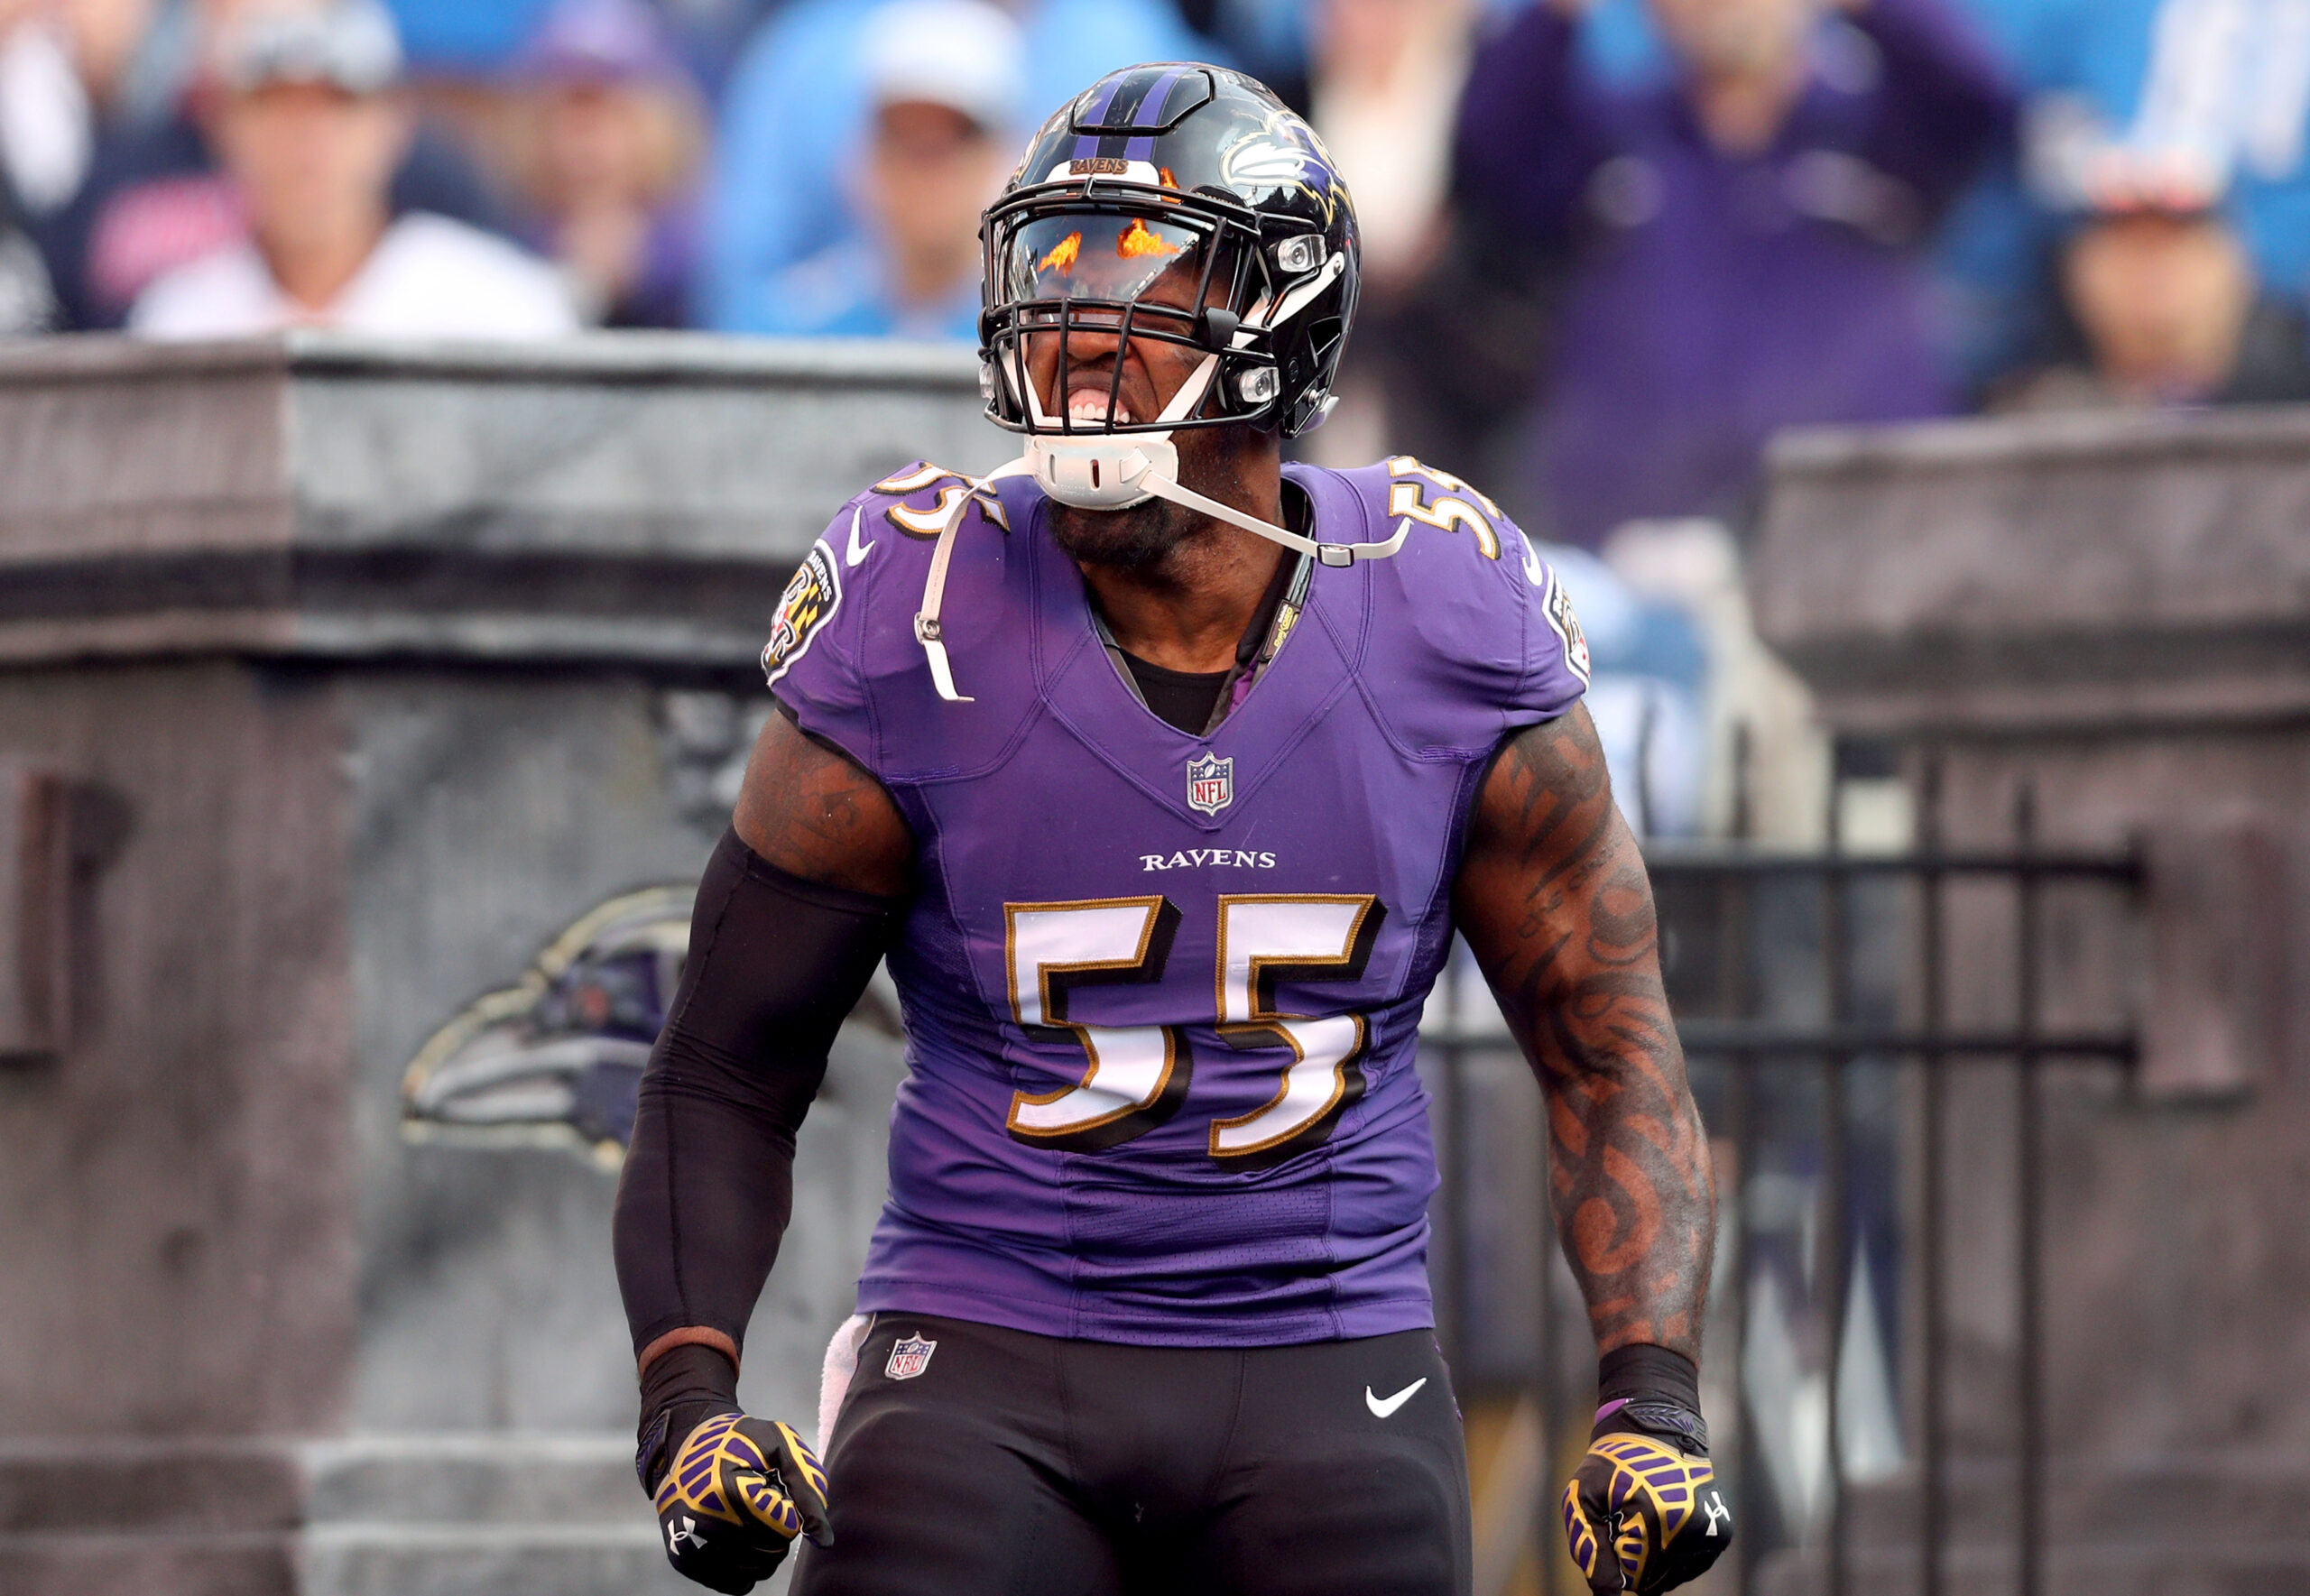 Terrell Suggs Arrested On Assault Charge: Details